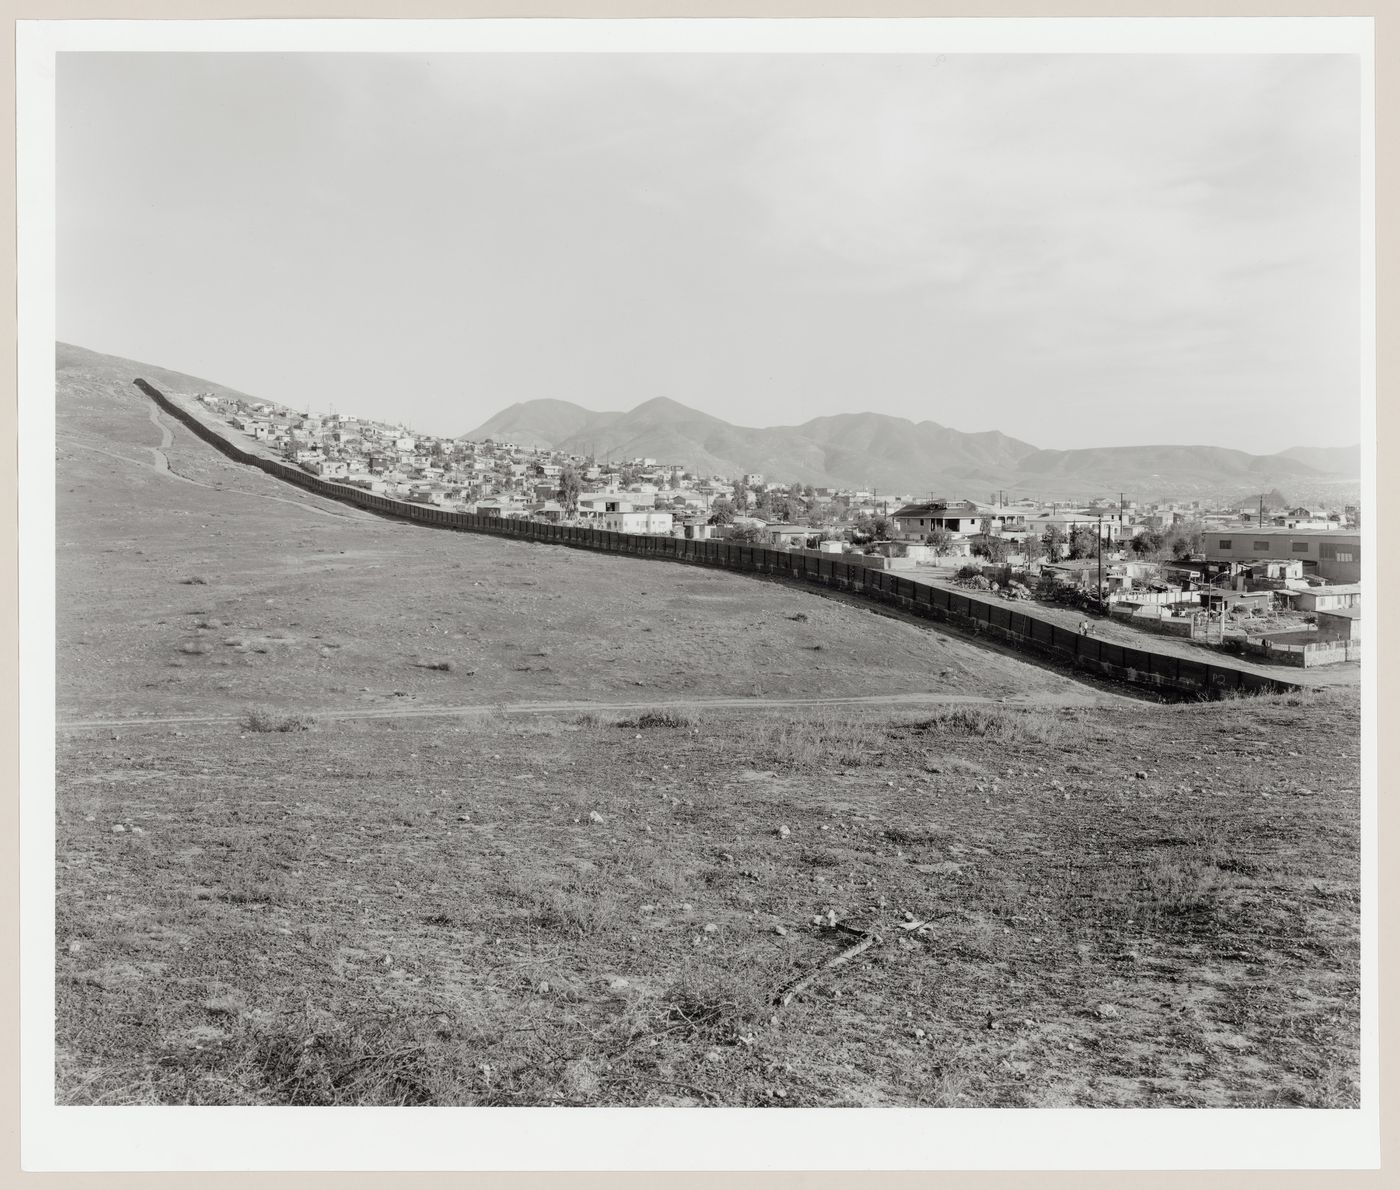 View of Otay Mesa, Mexico from San Diego County, California showing the United States-Mexico border fence, from the series "Running Fence"